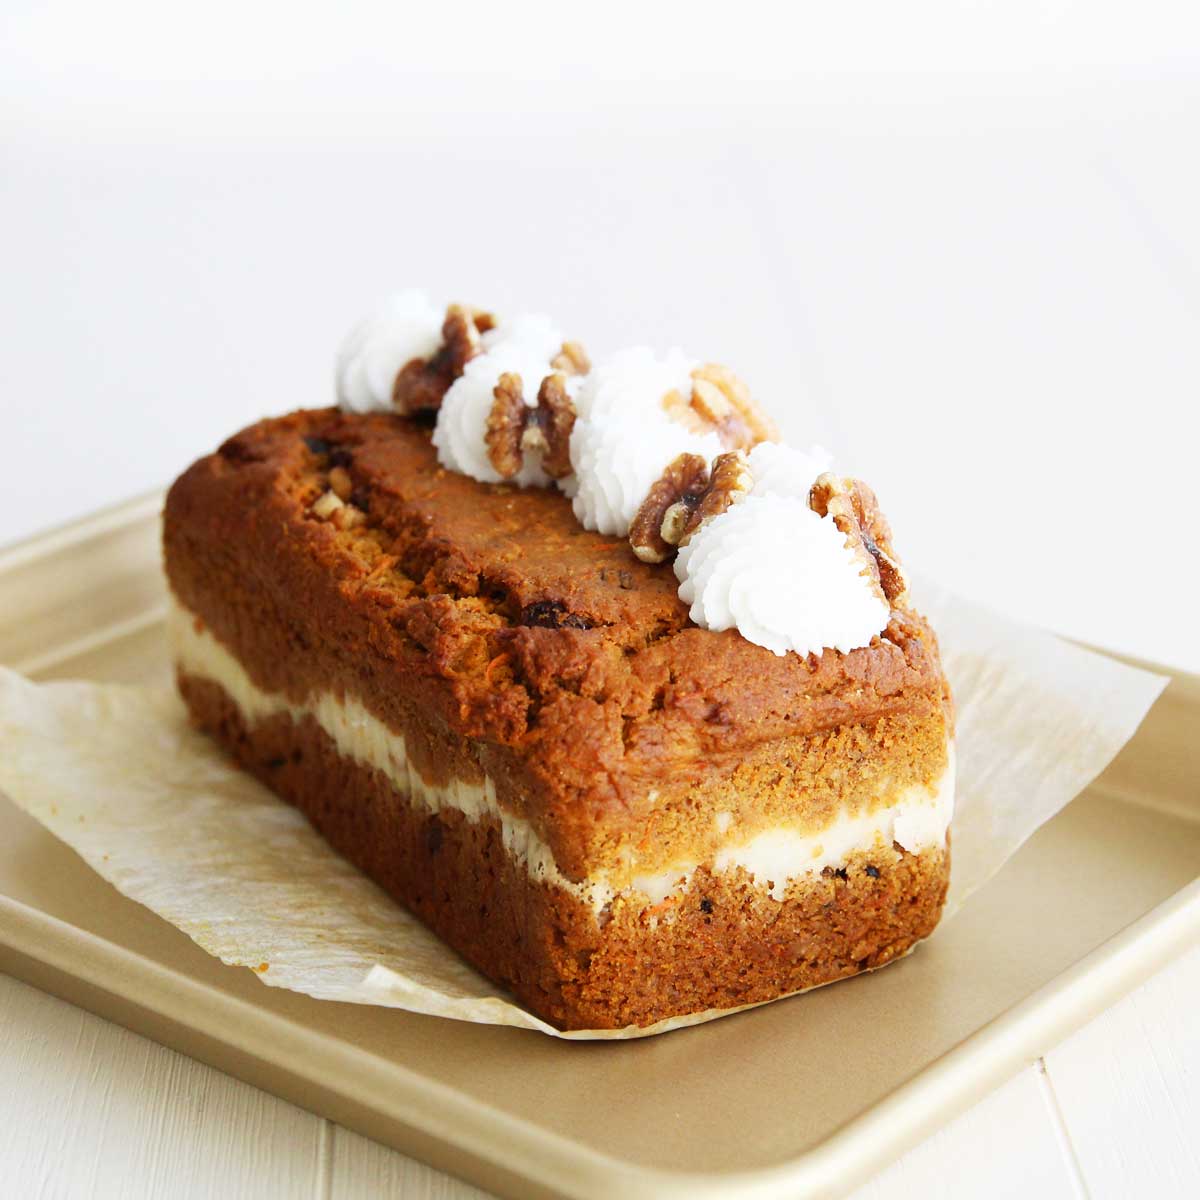 Carrot Pumpkin Bread with Vegan Cream Cheese Frosting (Eggless, Dairy Free Recipe) - Brown Sugar Whipped Cream